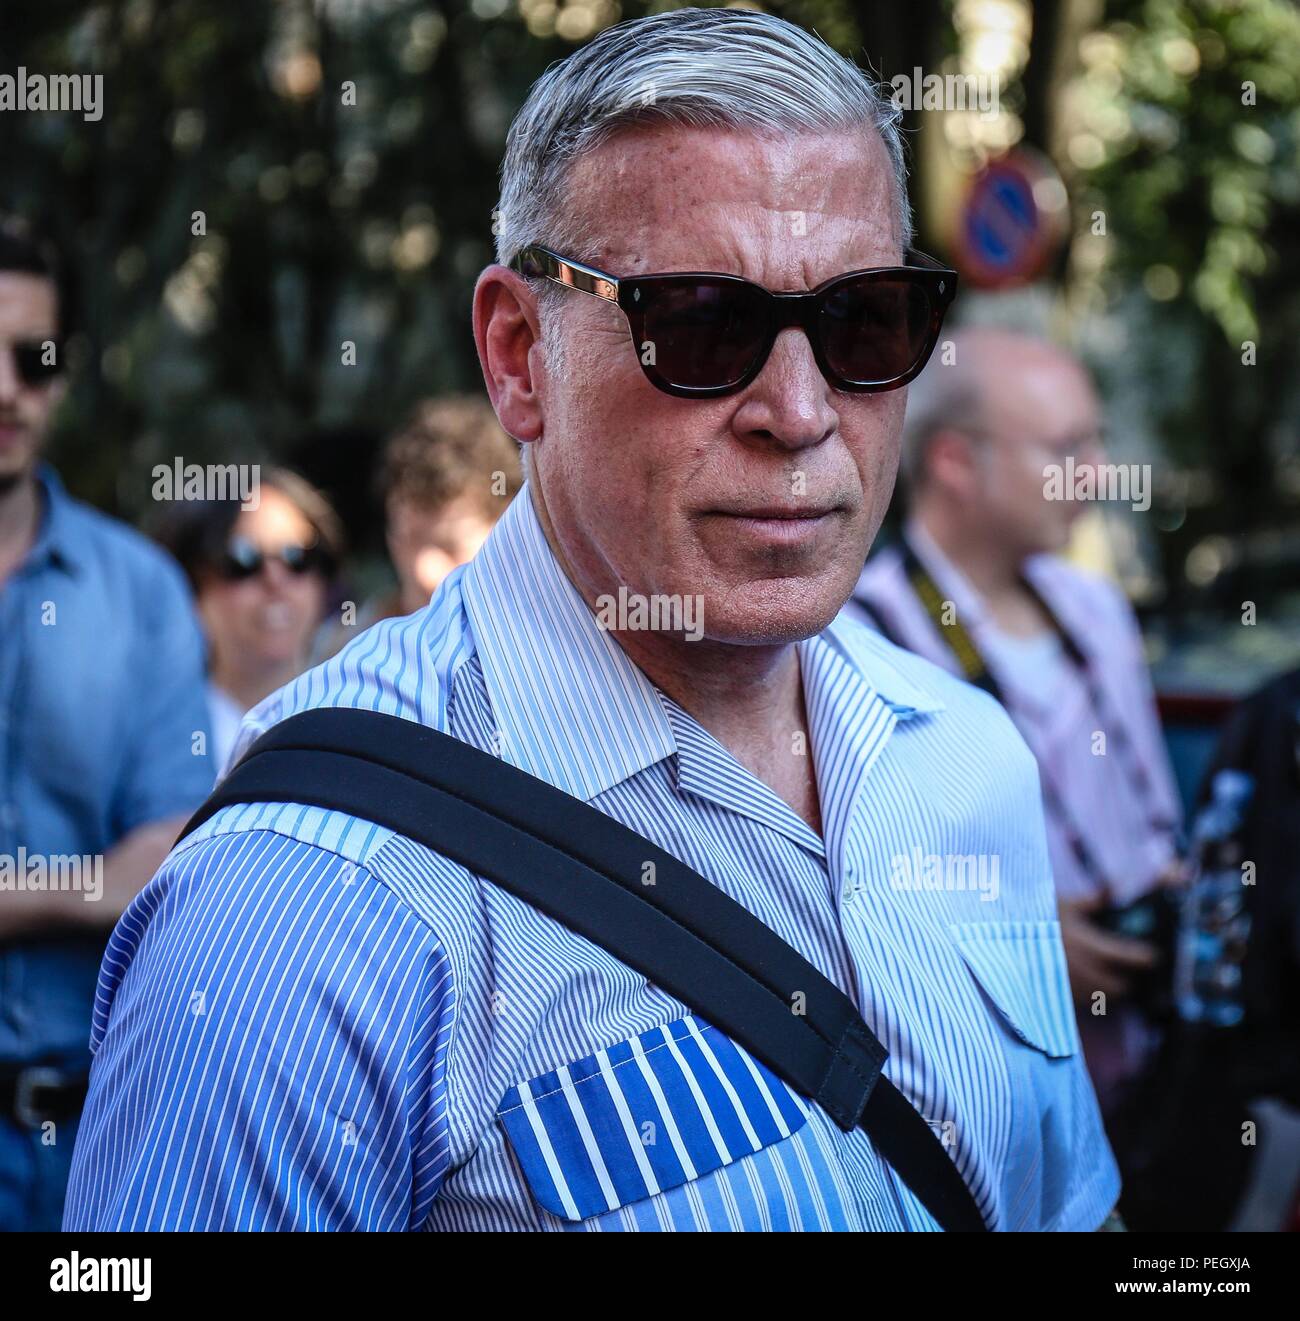 Milan, Italy. 17th June, 2018. Nick Wooster on the street during the ...